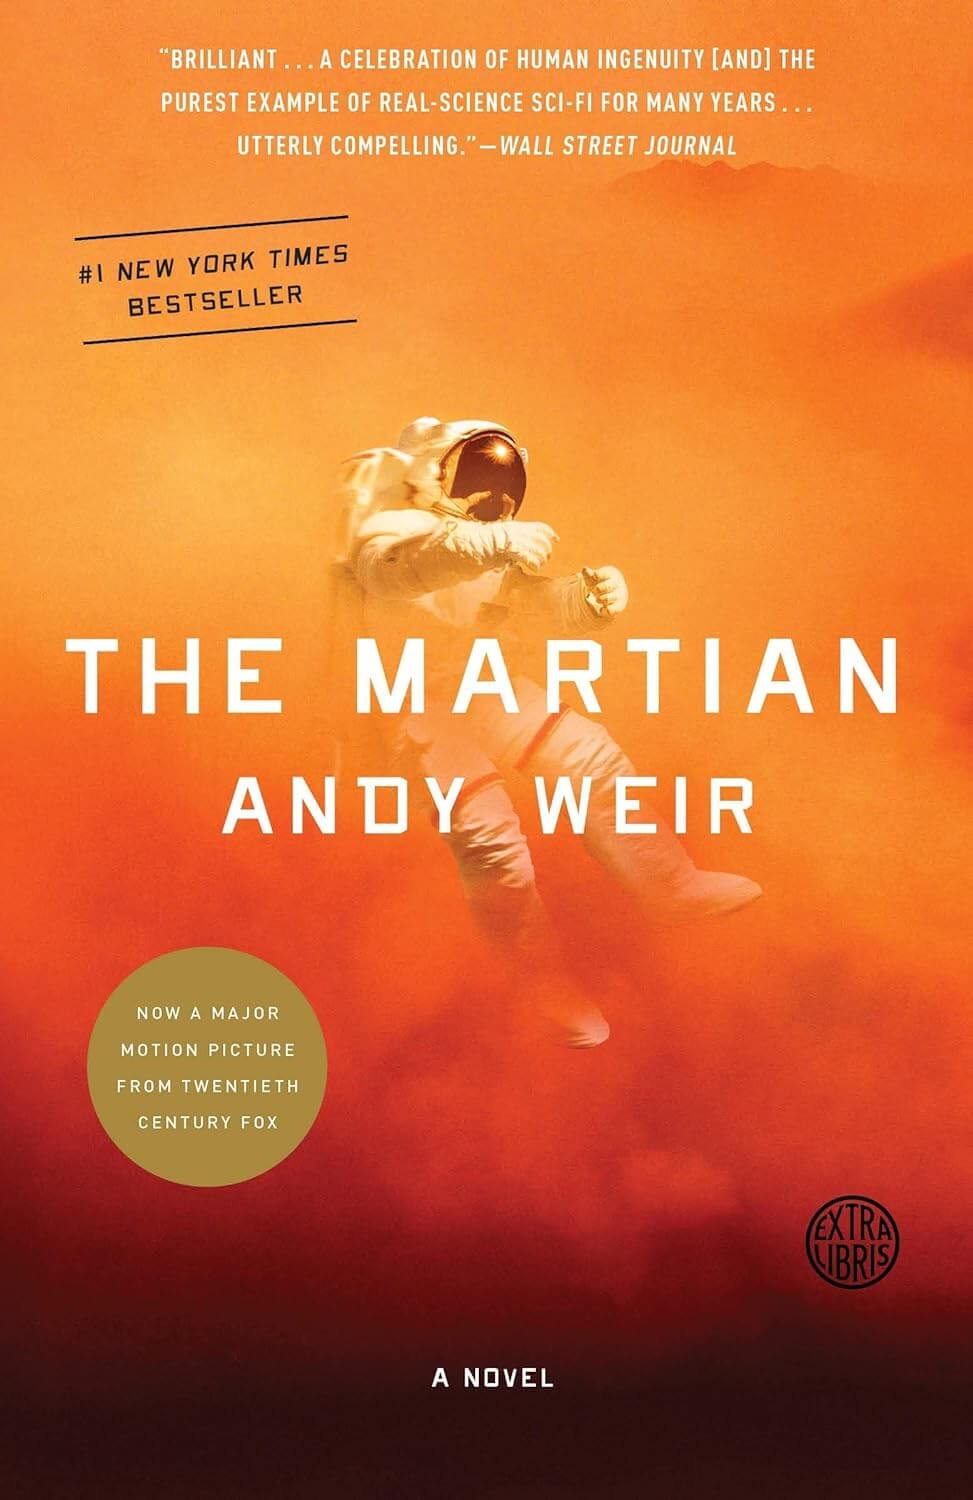 "The Martian" by Andy Weir